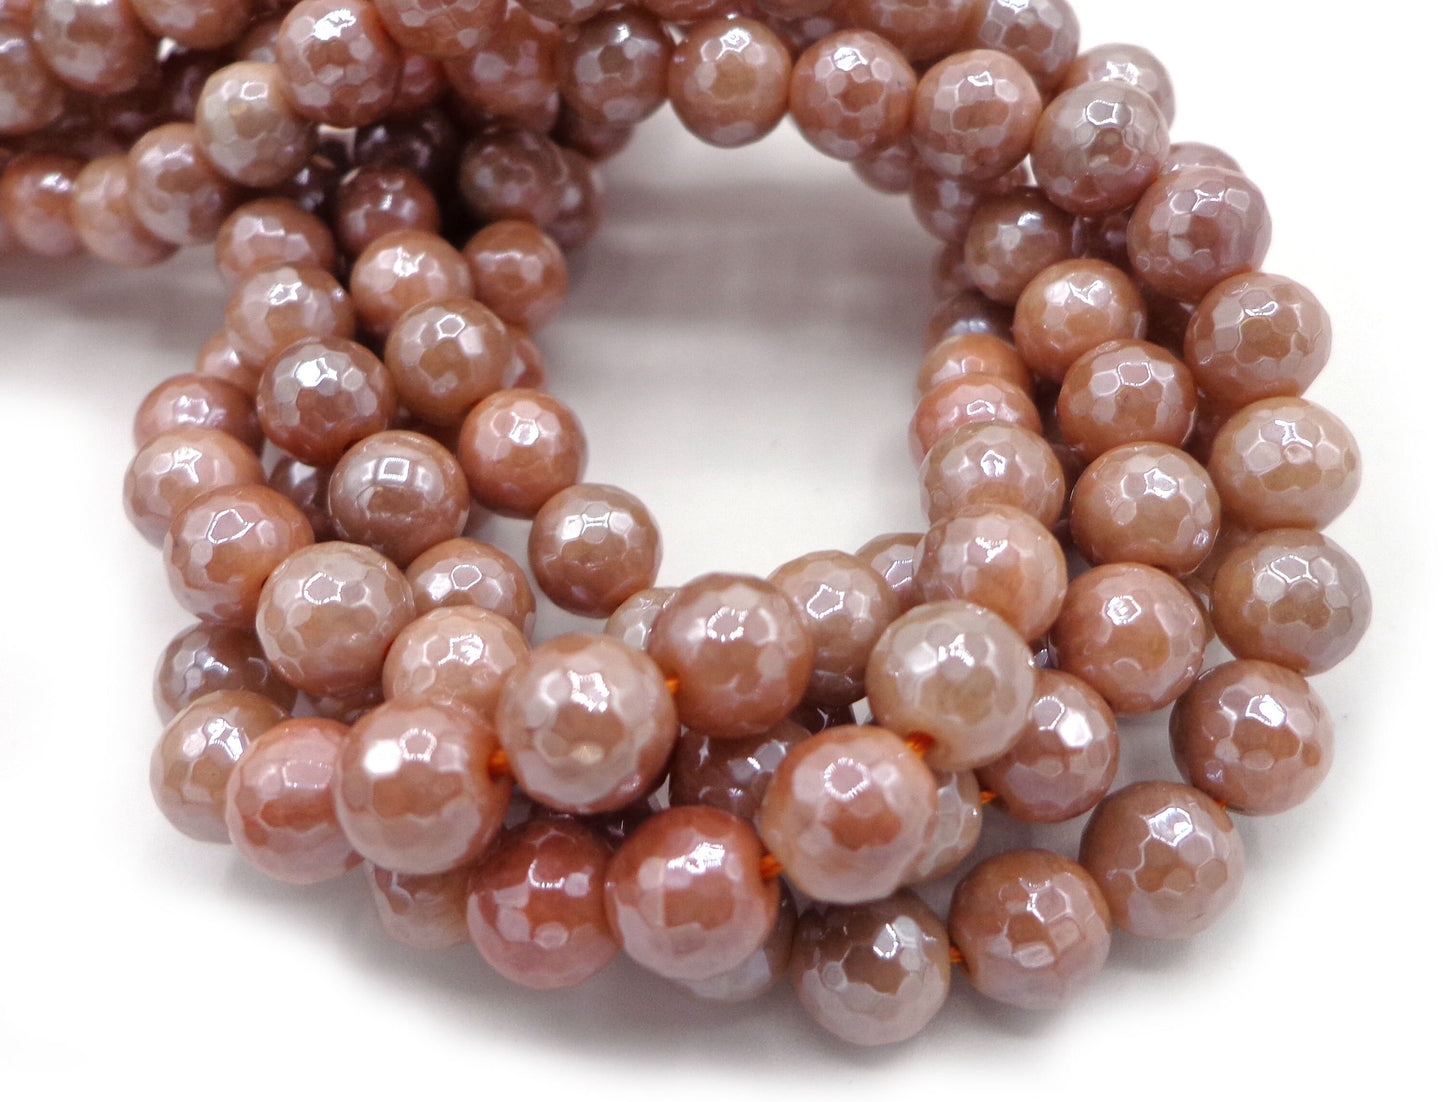 NATURAL Peach Moonstone Gemstone Beads Faceted 6mm 8mm 10mm 12mm Round Beads Silverite AB Coated, Full Strand 15.5"